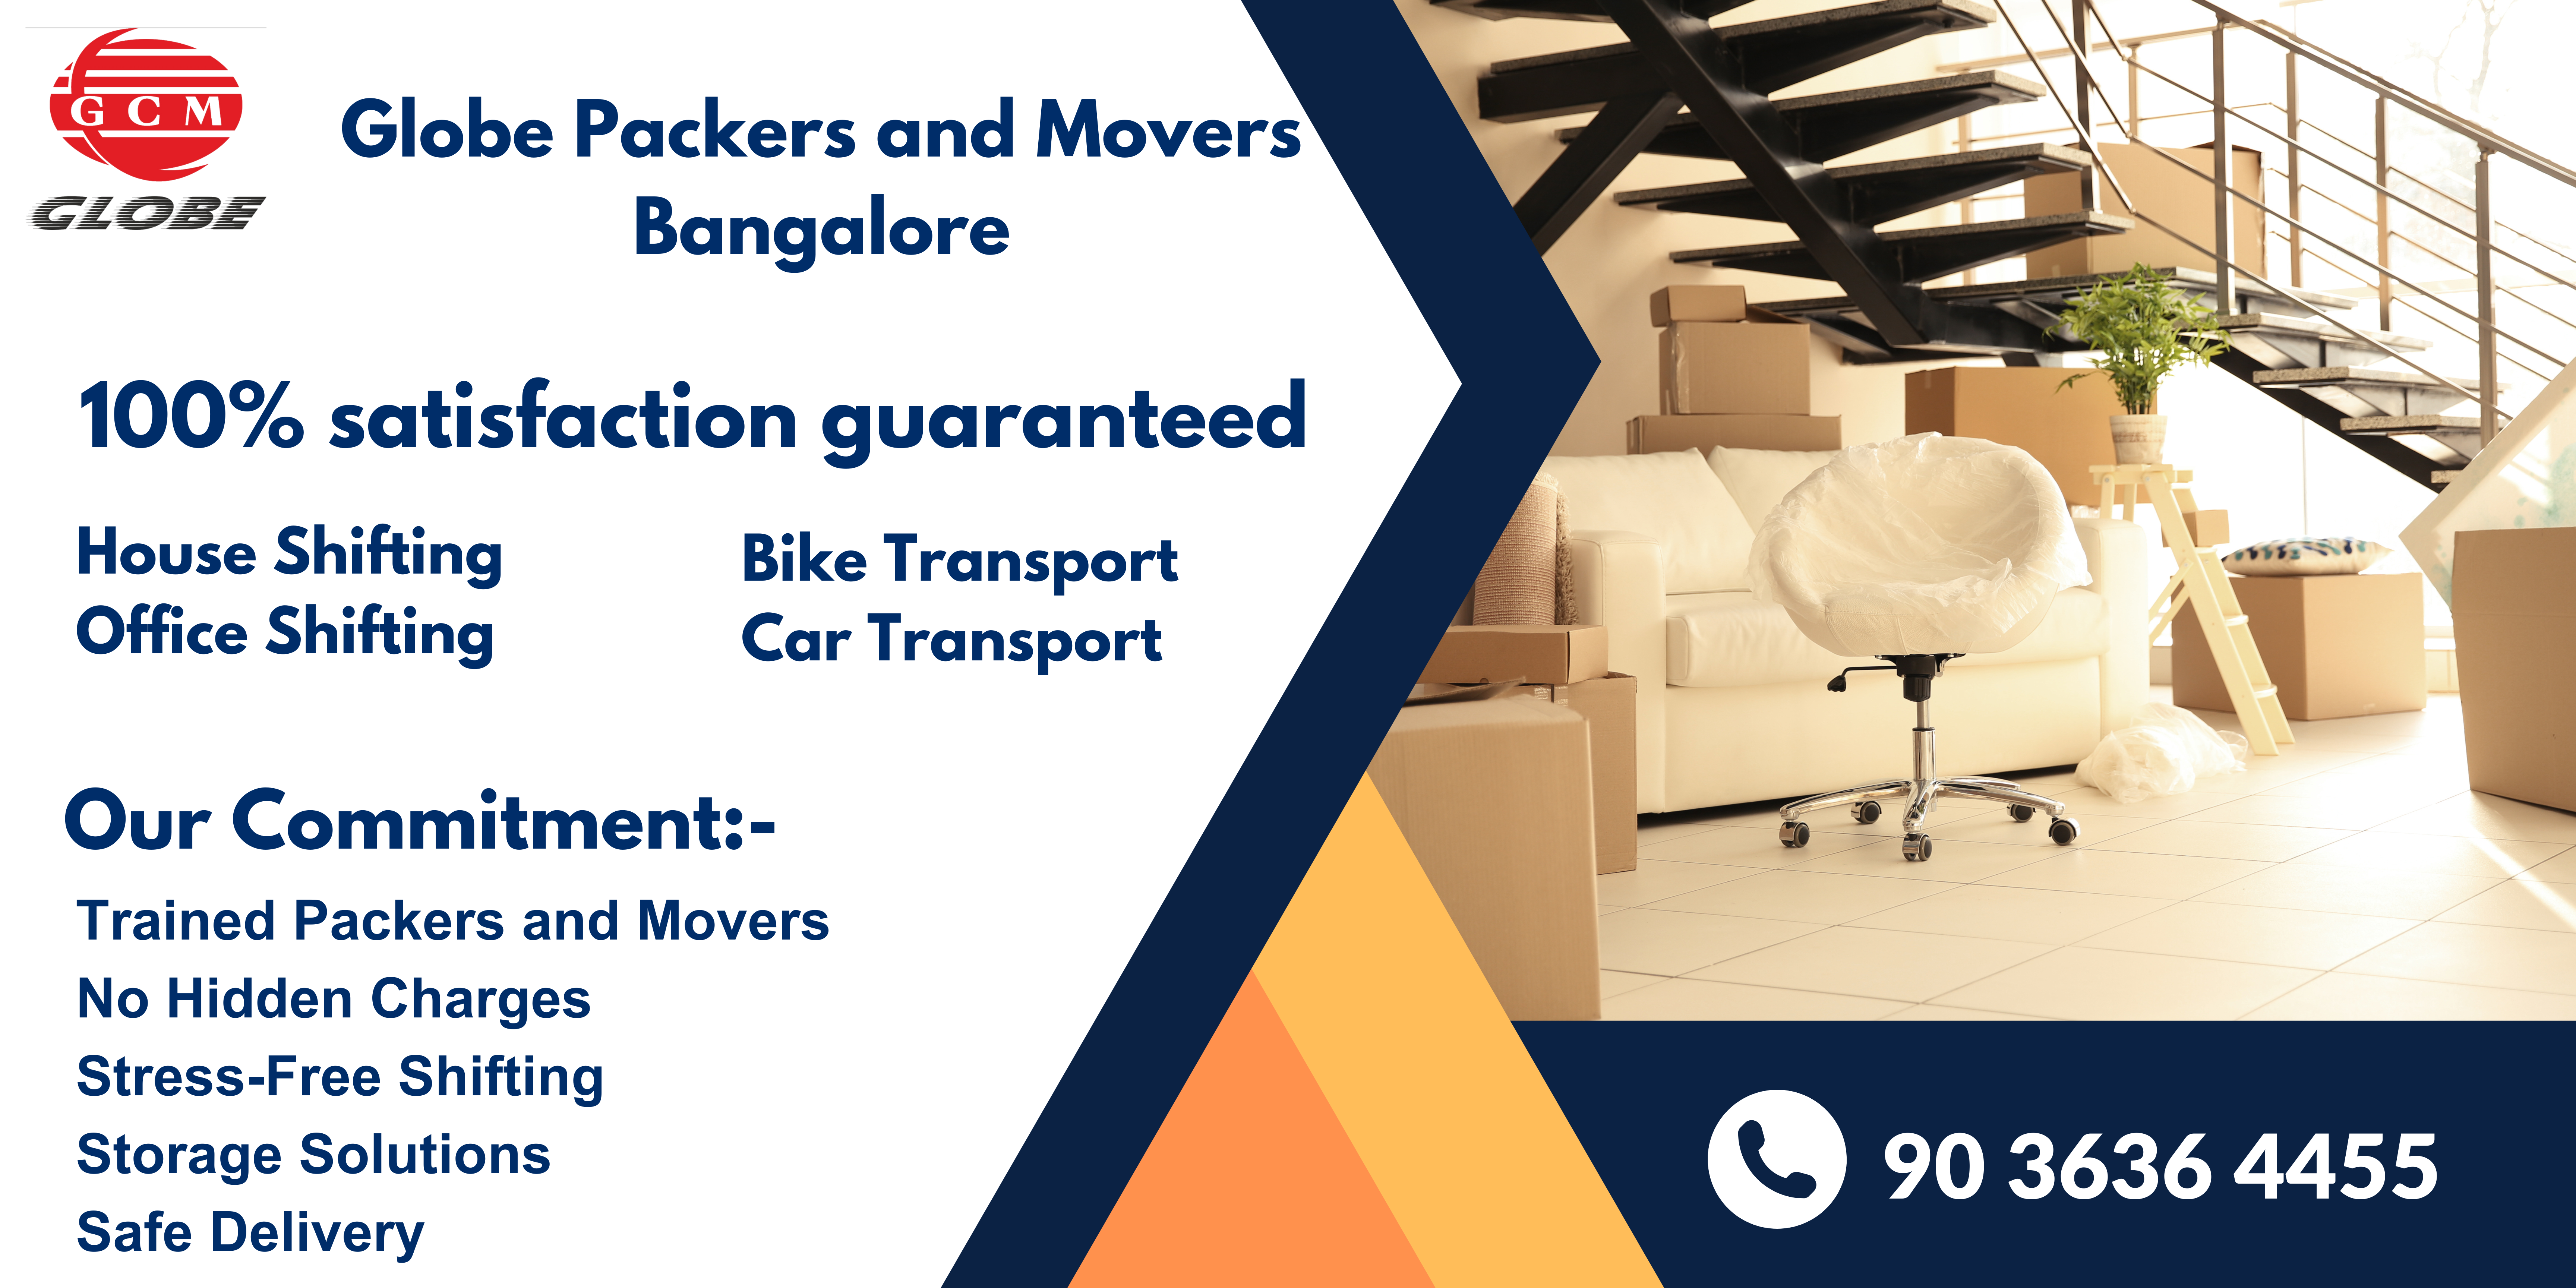 Packers and Movers bangalore, Cheap Packers and Movers bangalore, Packers and Movers near me